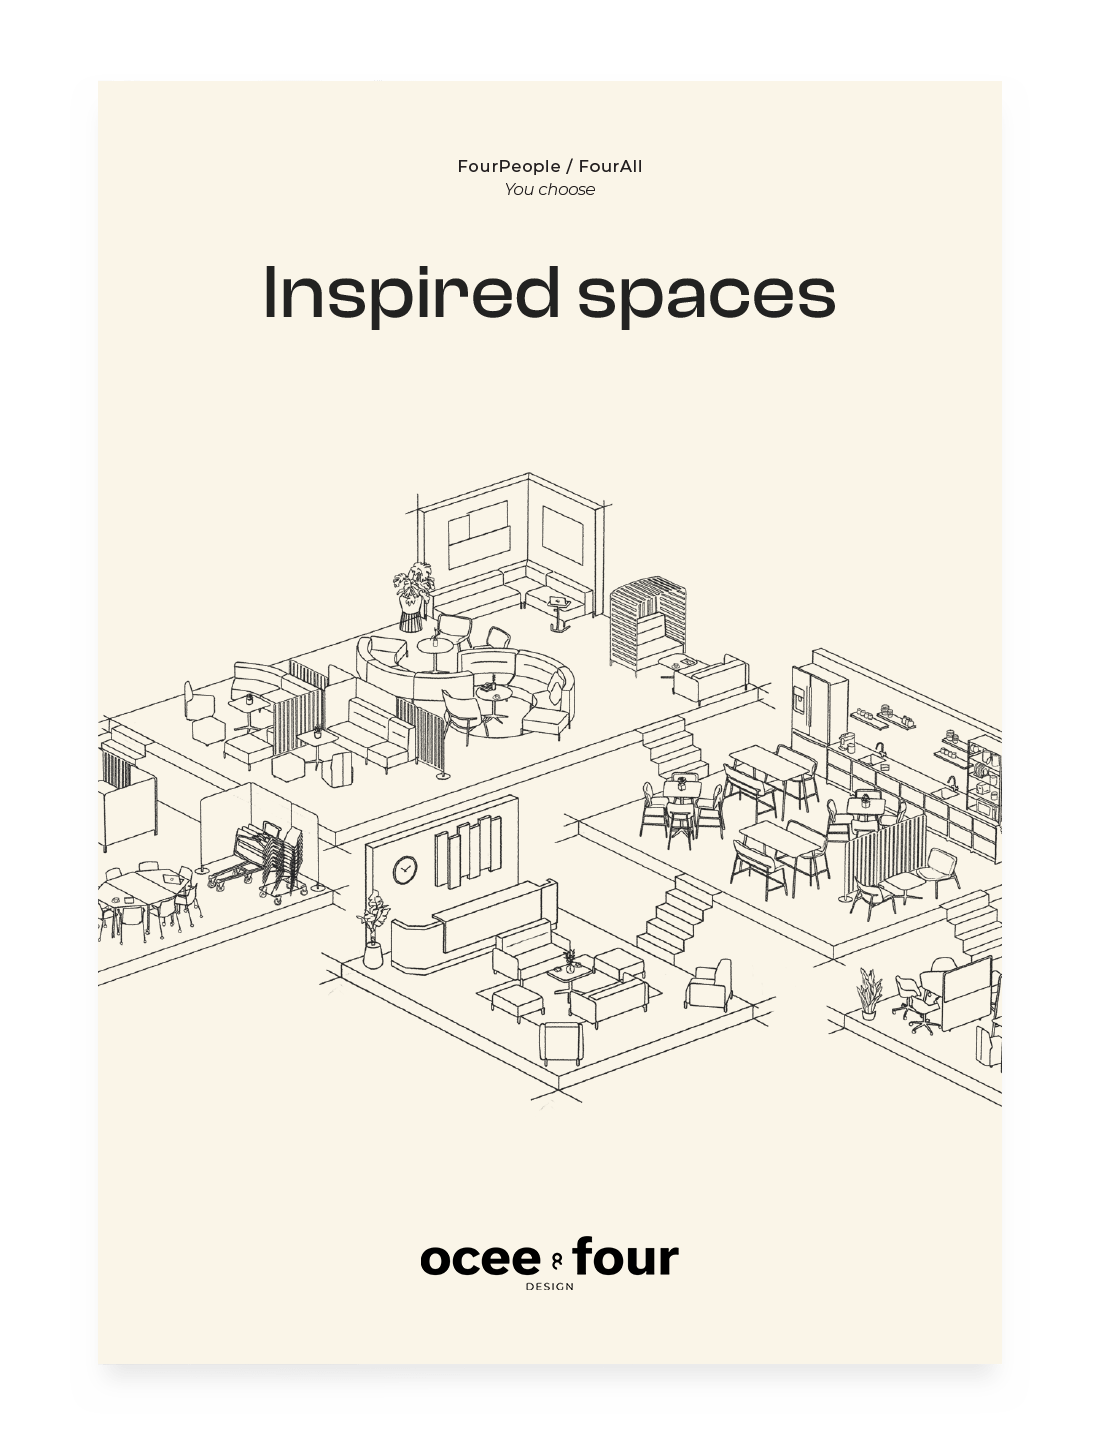 Inspired spaces